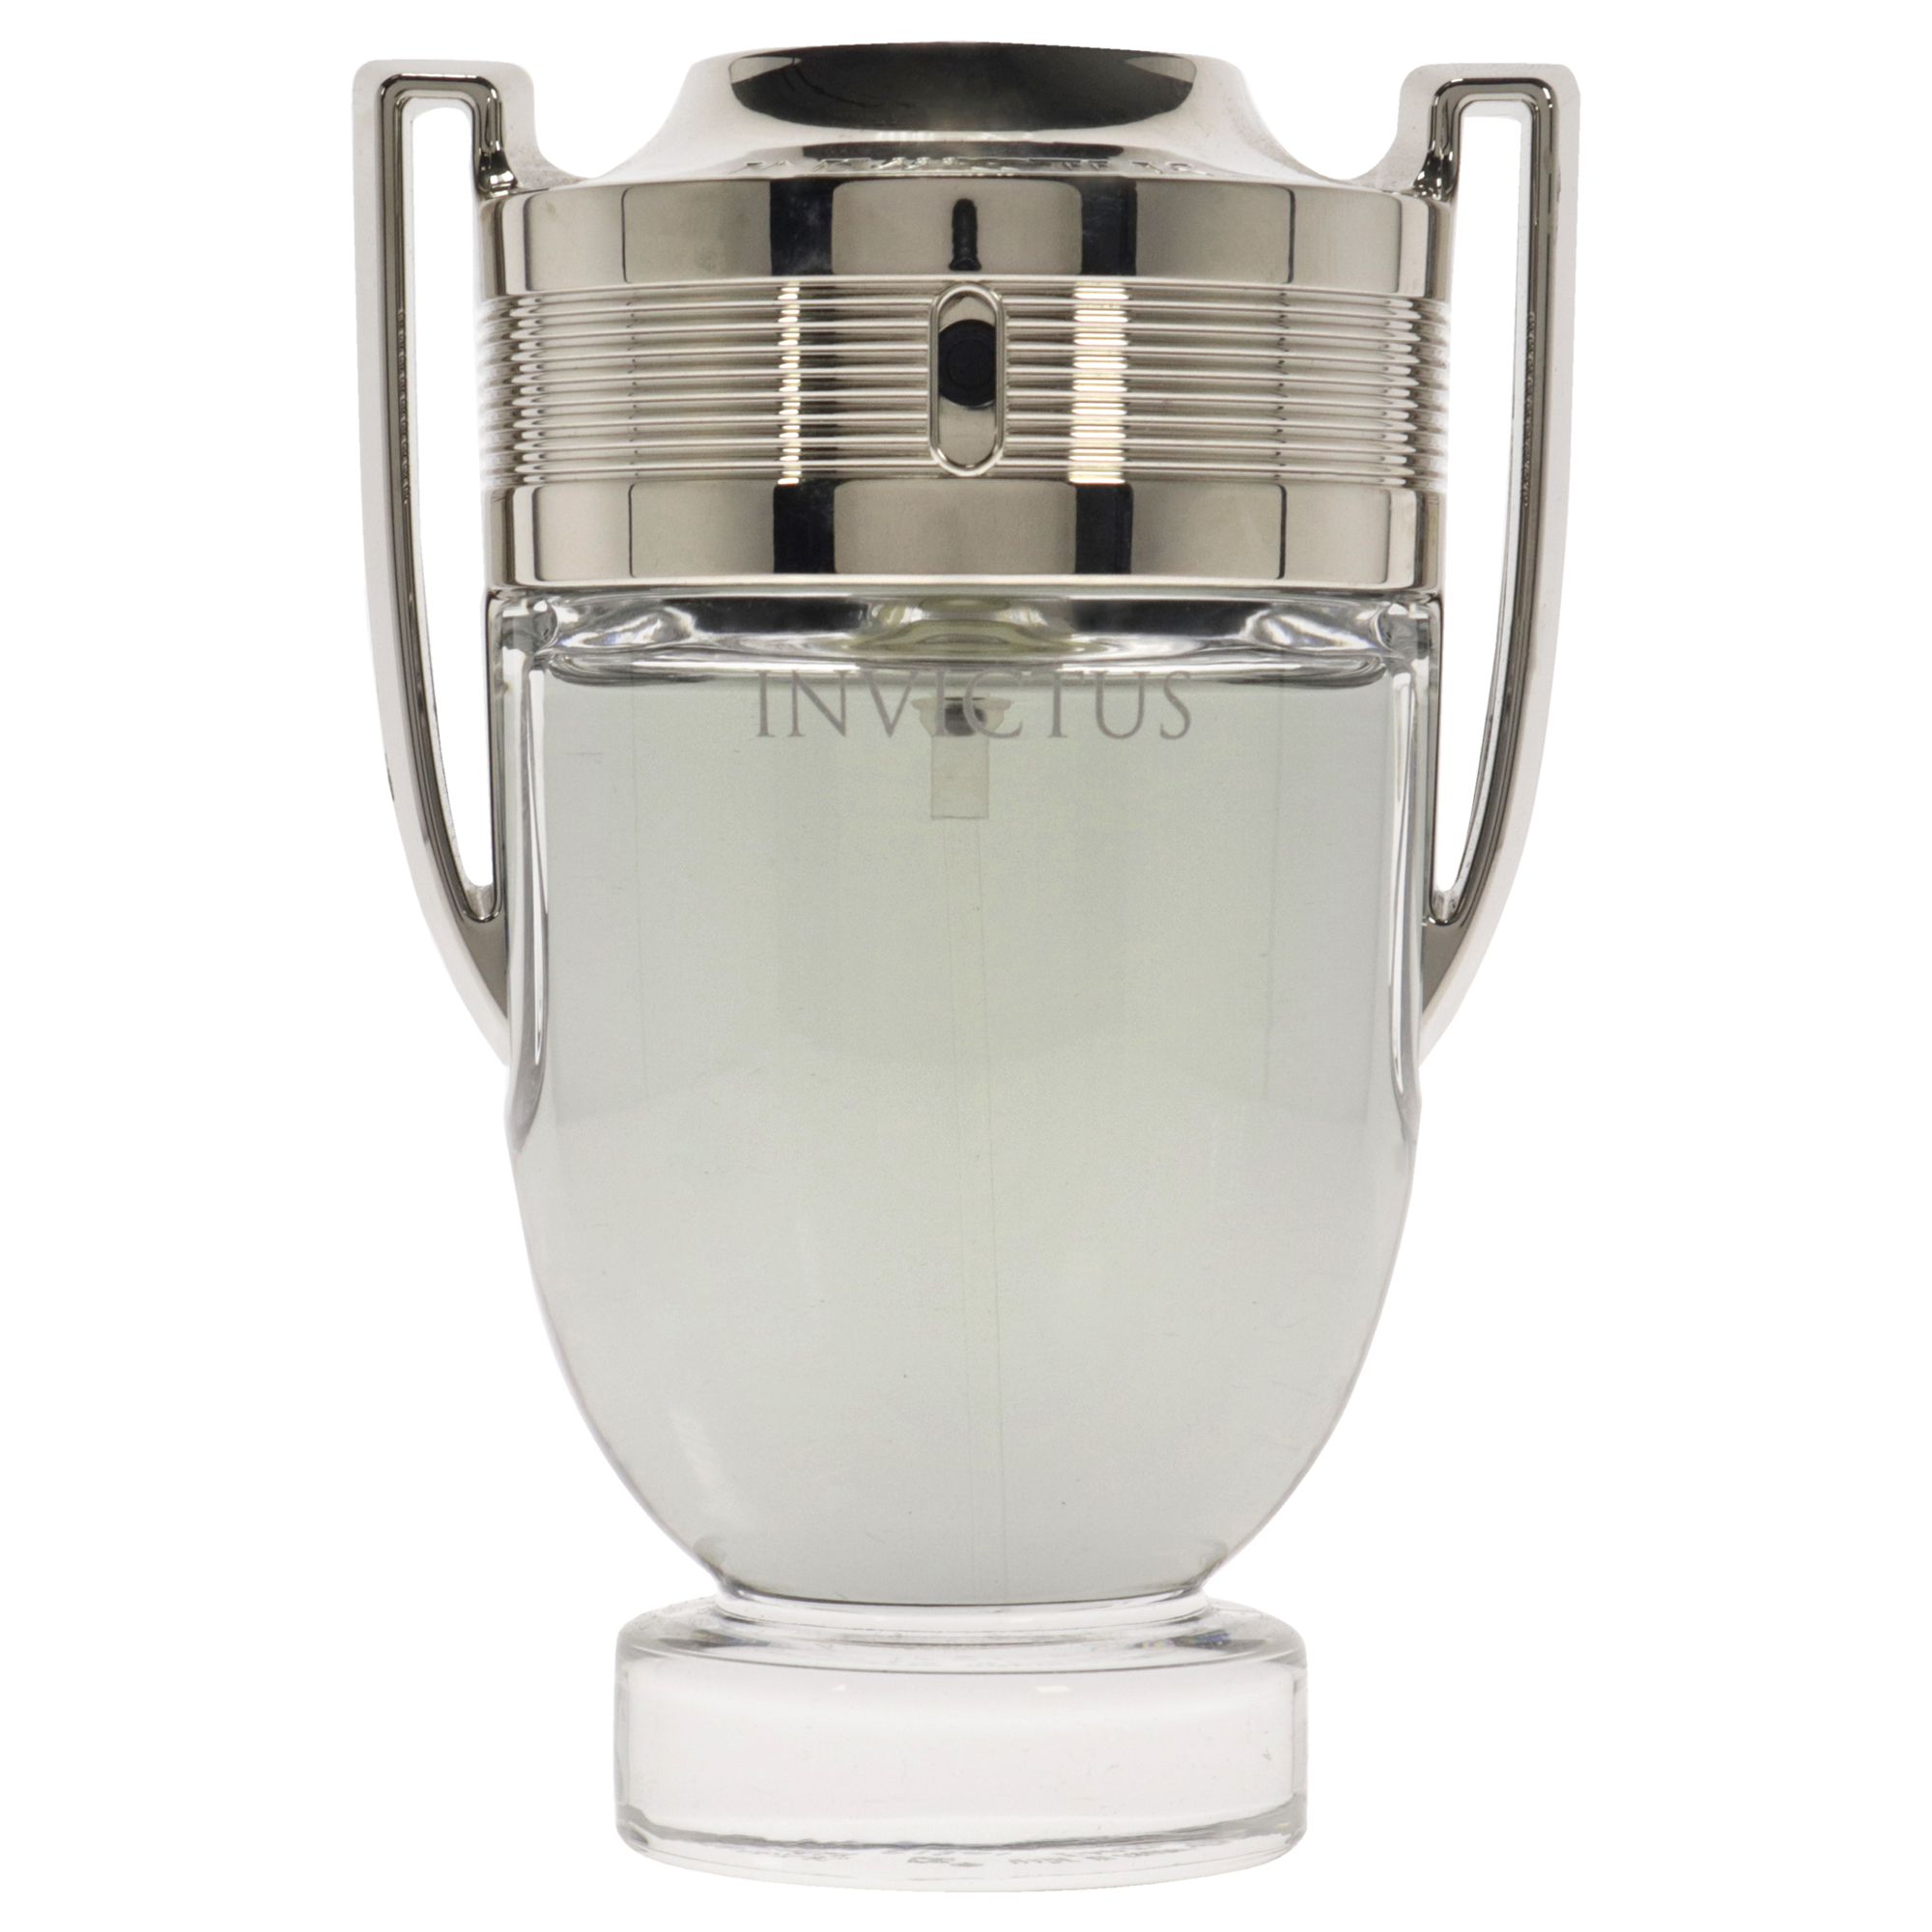 Paco Rabanne Invictus by Paco Rabanne for Men - 3.4 oz EDT Spray (Tester)